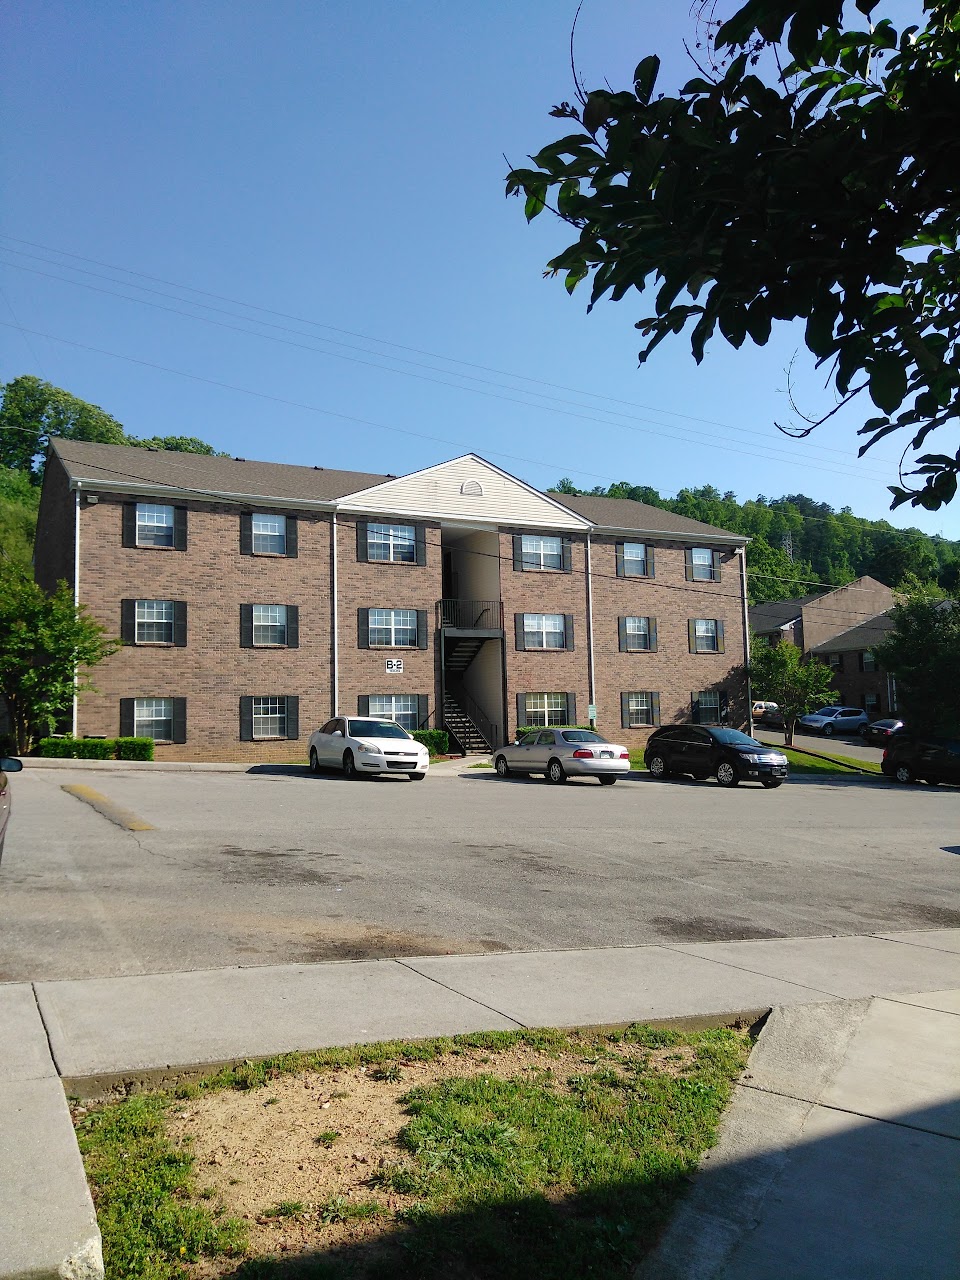 Photo of ROCKY TOP APTS. Affordable housing located at 1807 ROCKY VIEW WAY KNOXVILLE, TN 37918